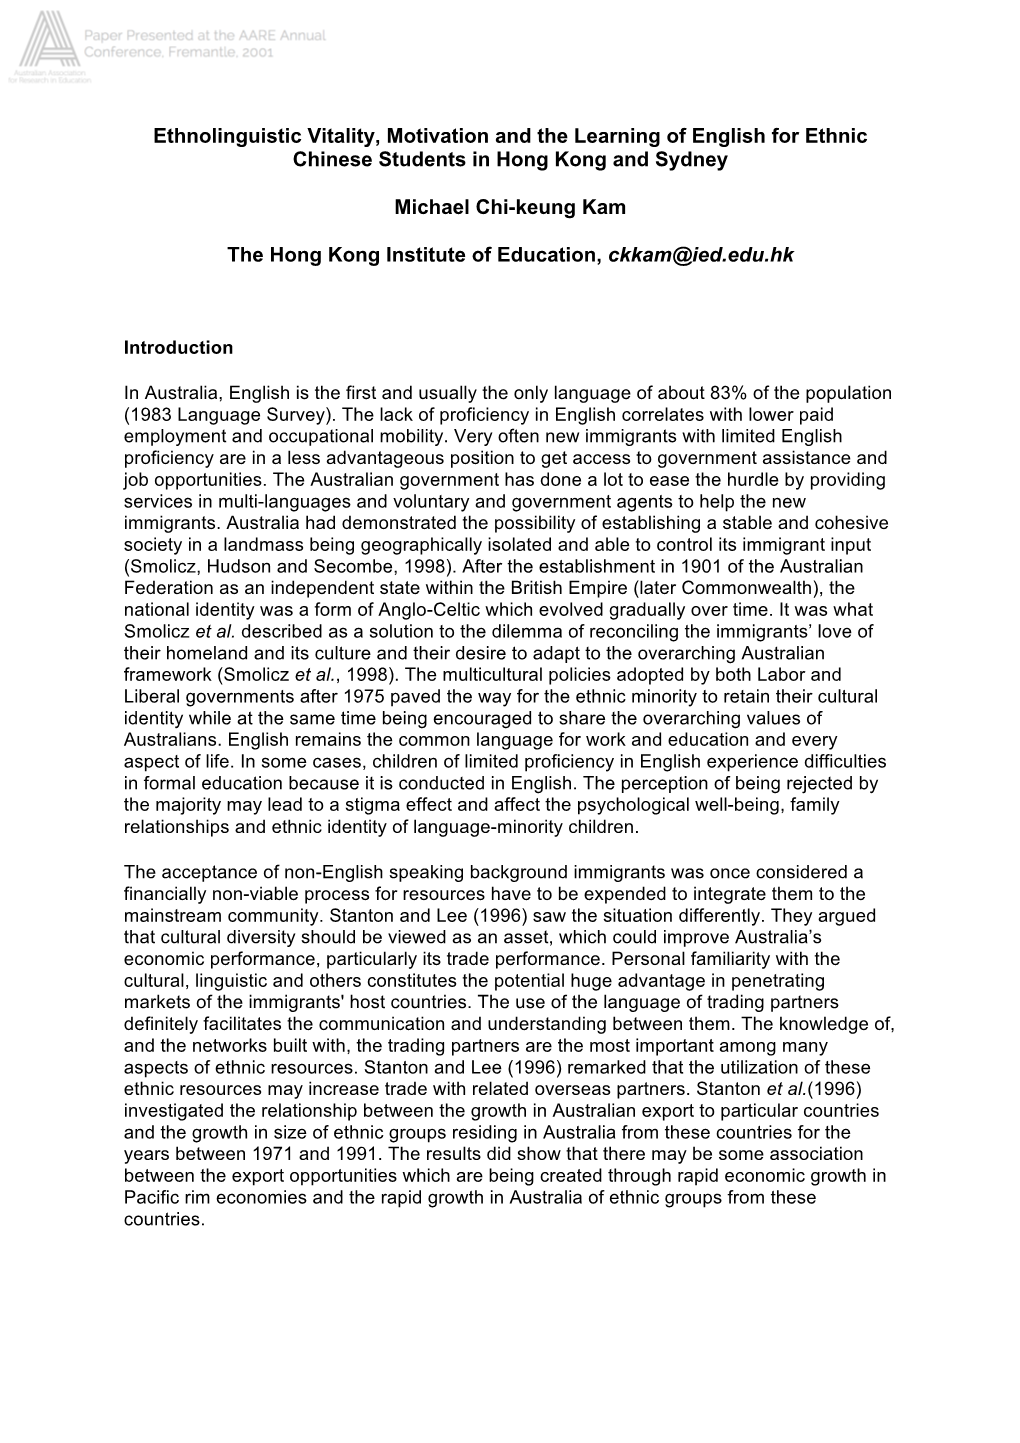 Ethnolinguistic Vitality, Motivation and the Learning of English for Ethnic Chinese Students in Hong Kong and Sydney